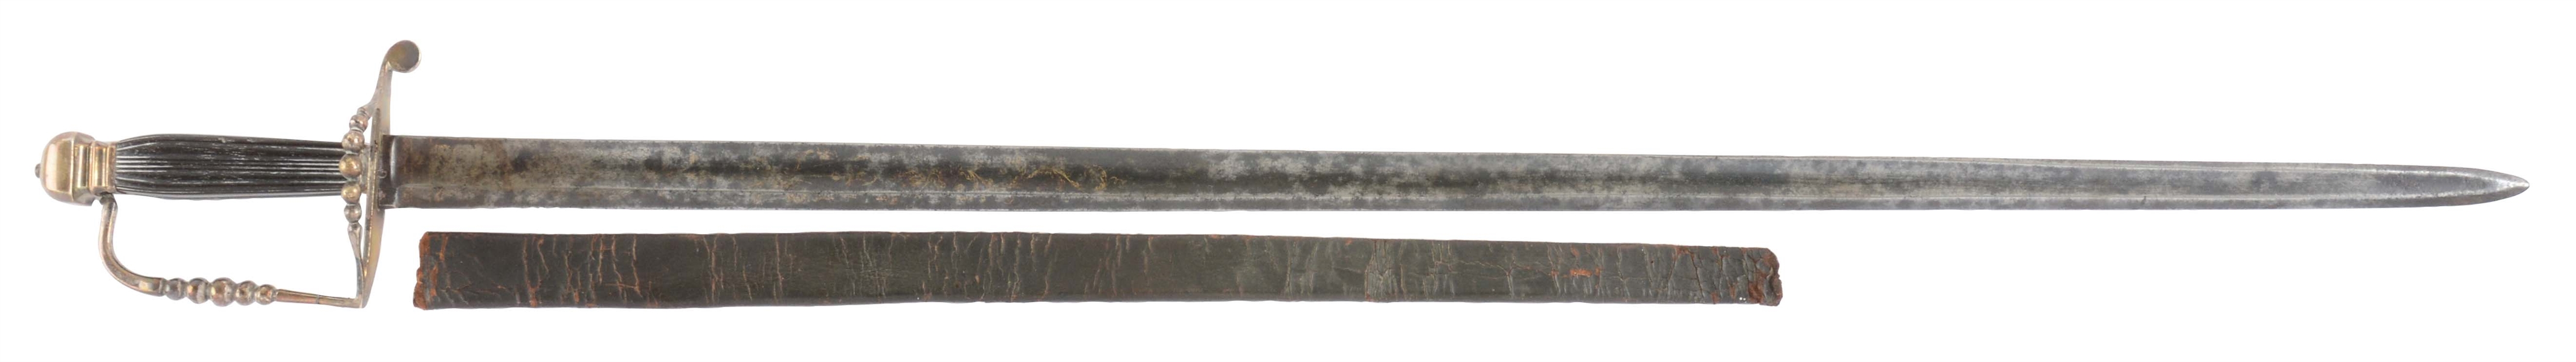 AMERICAN SILVER HILTED PILLOW POMMEL SPADROON, BLADE MARKED "WELLS & COMPANY".